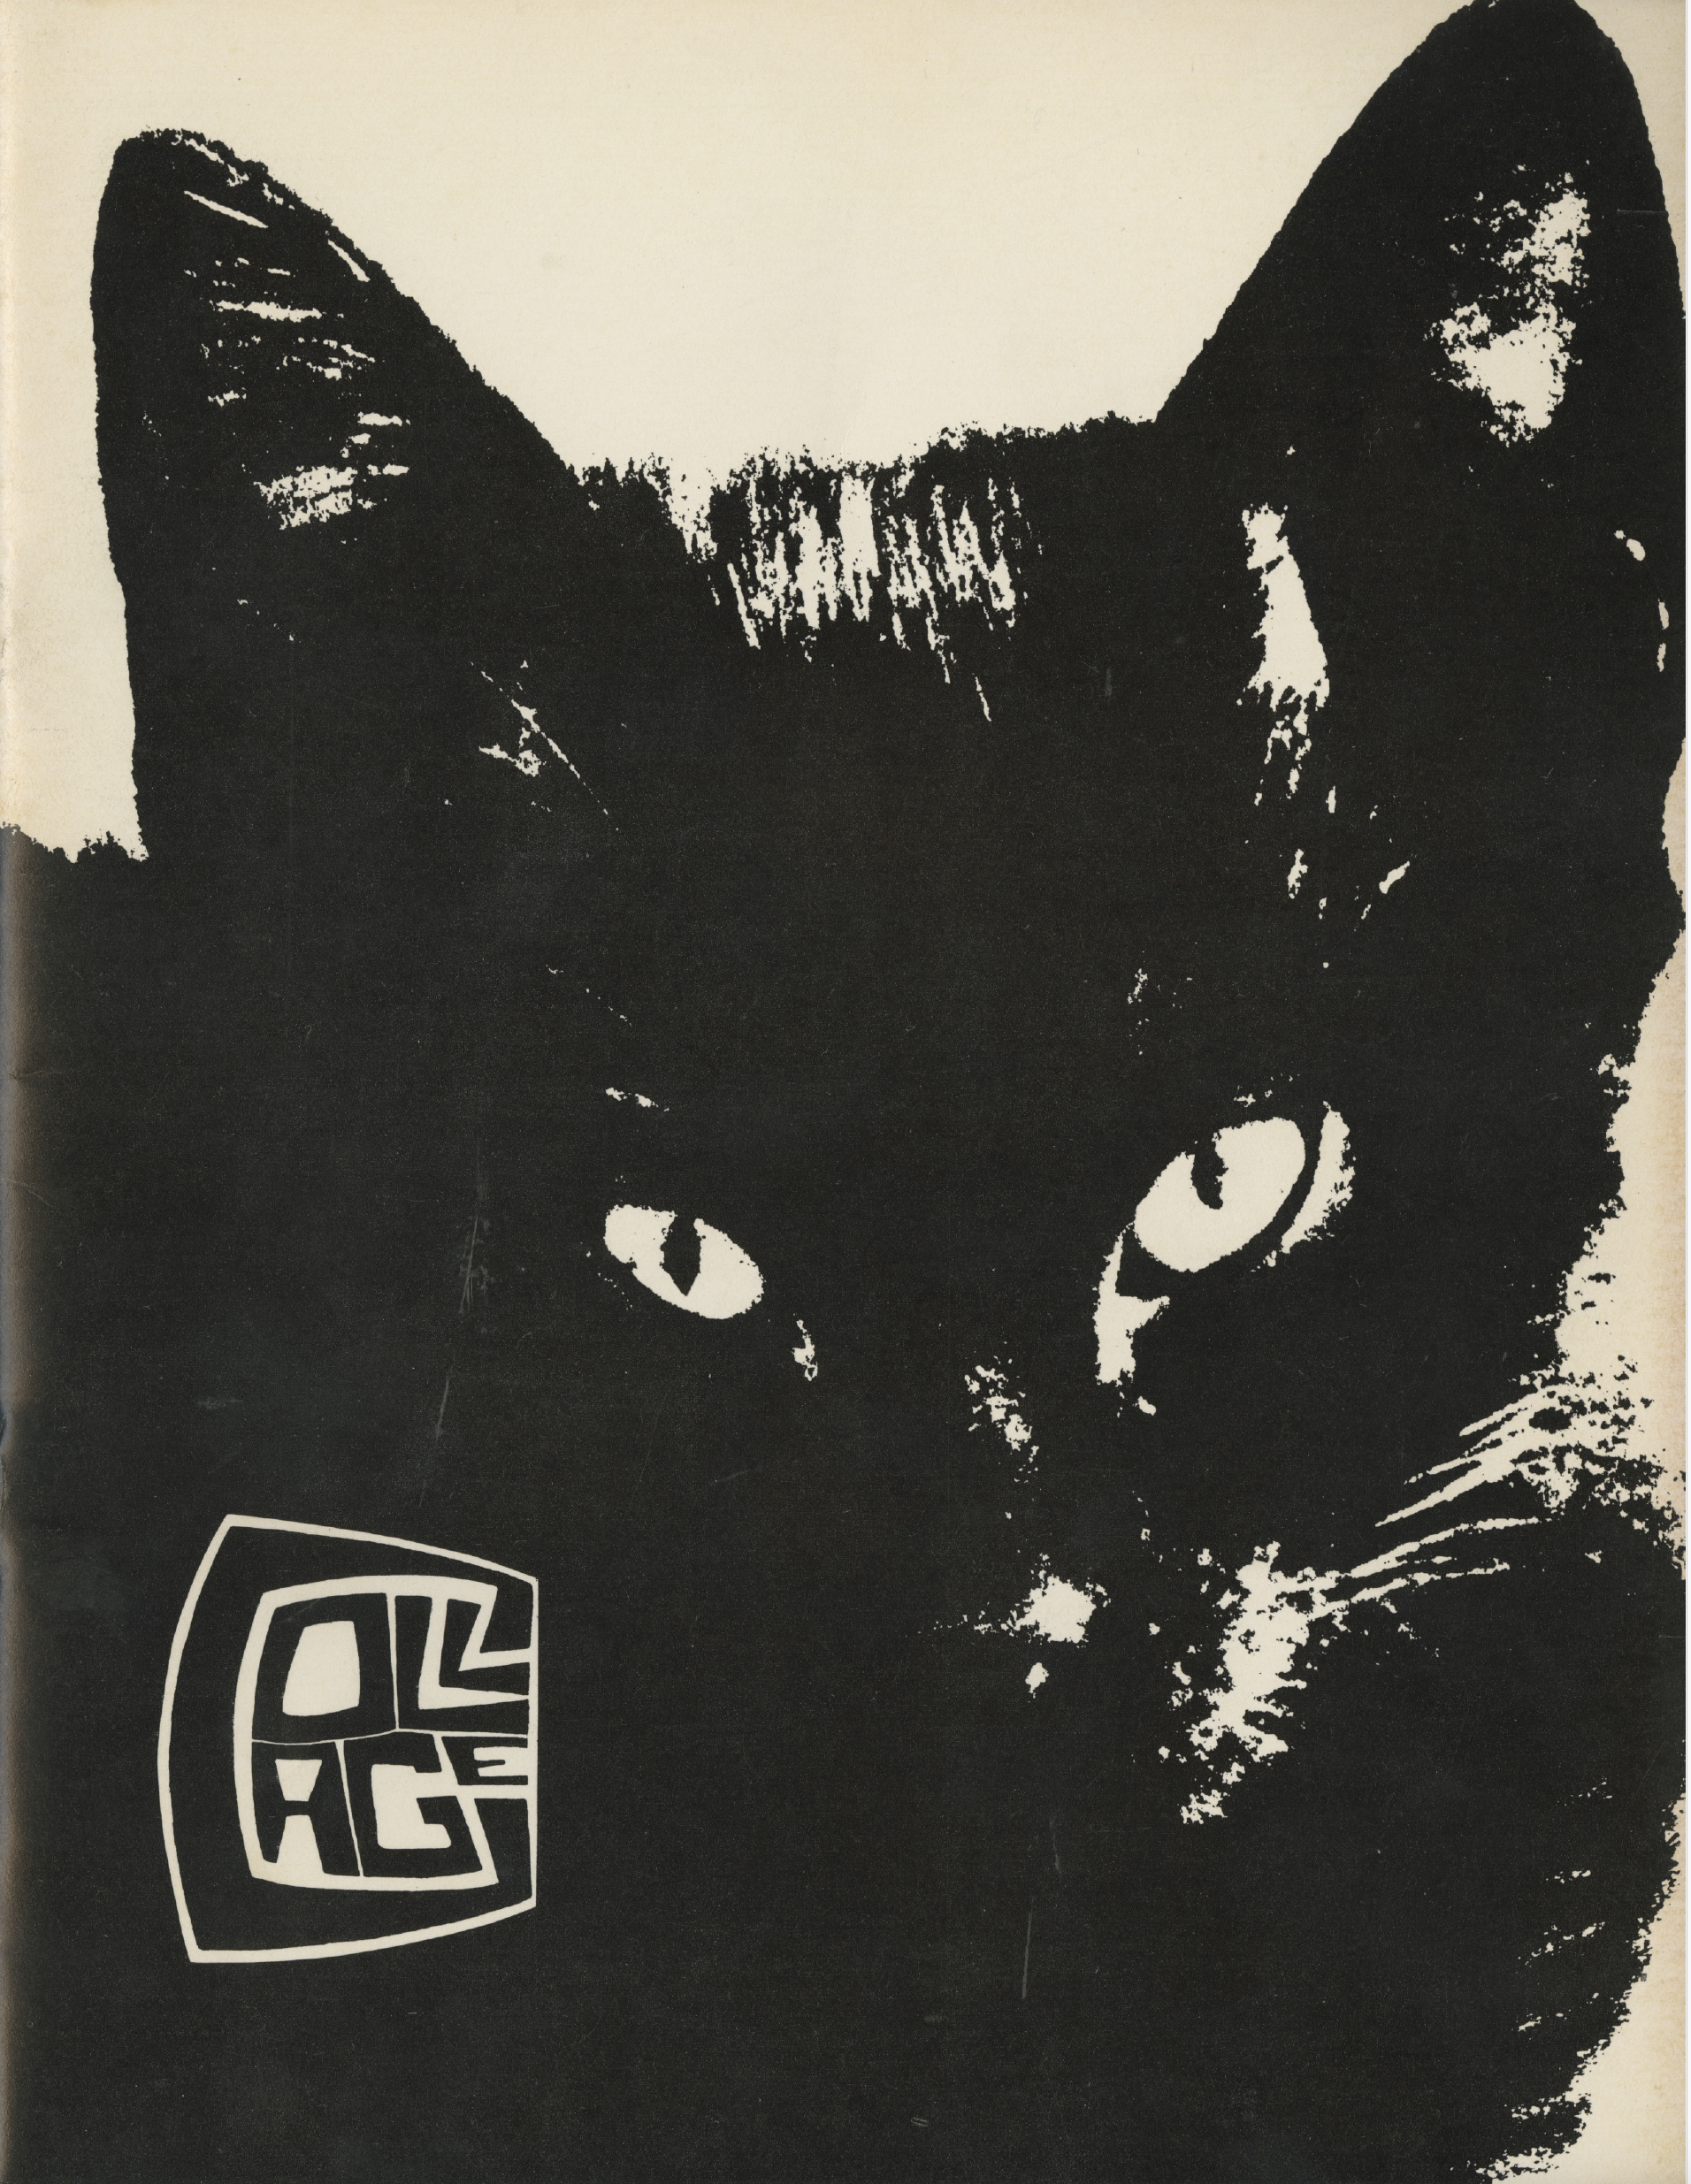 May 1971 Collage cover featuring black cat